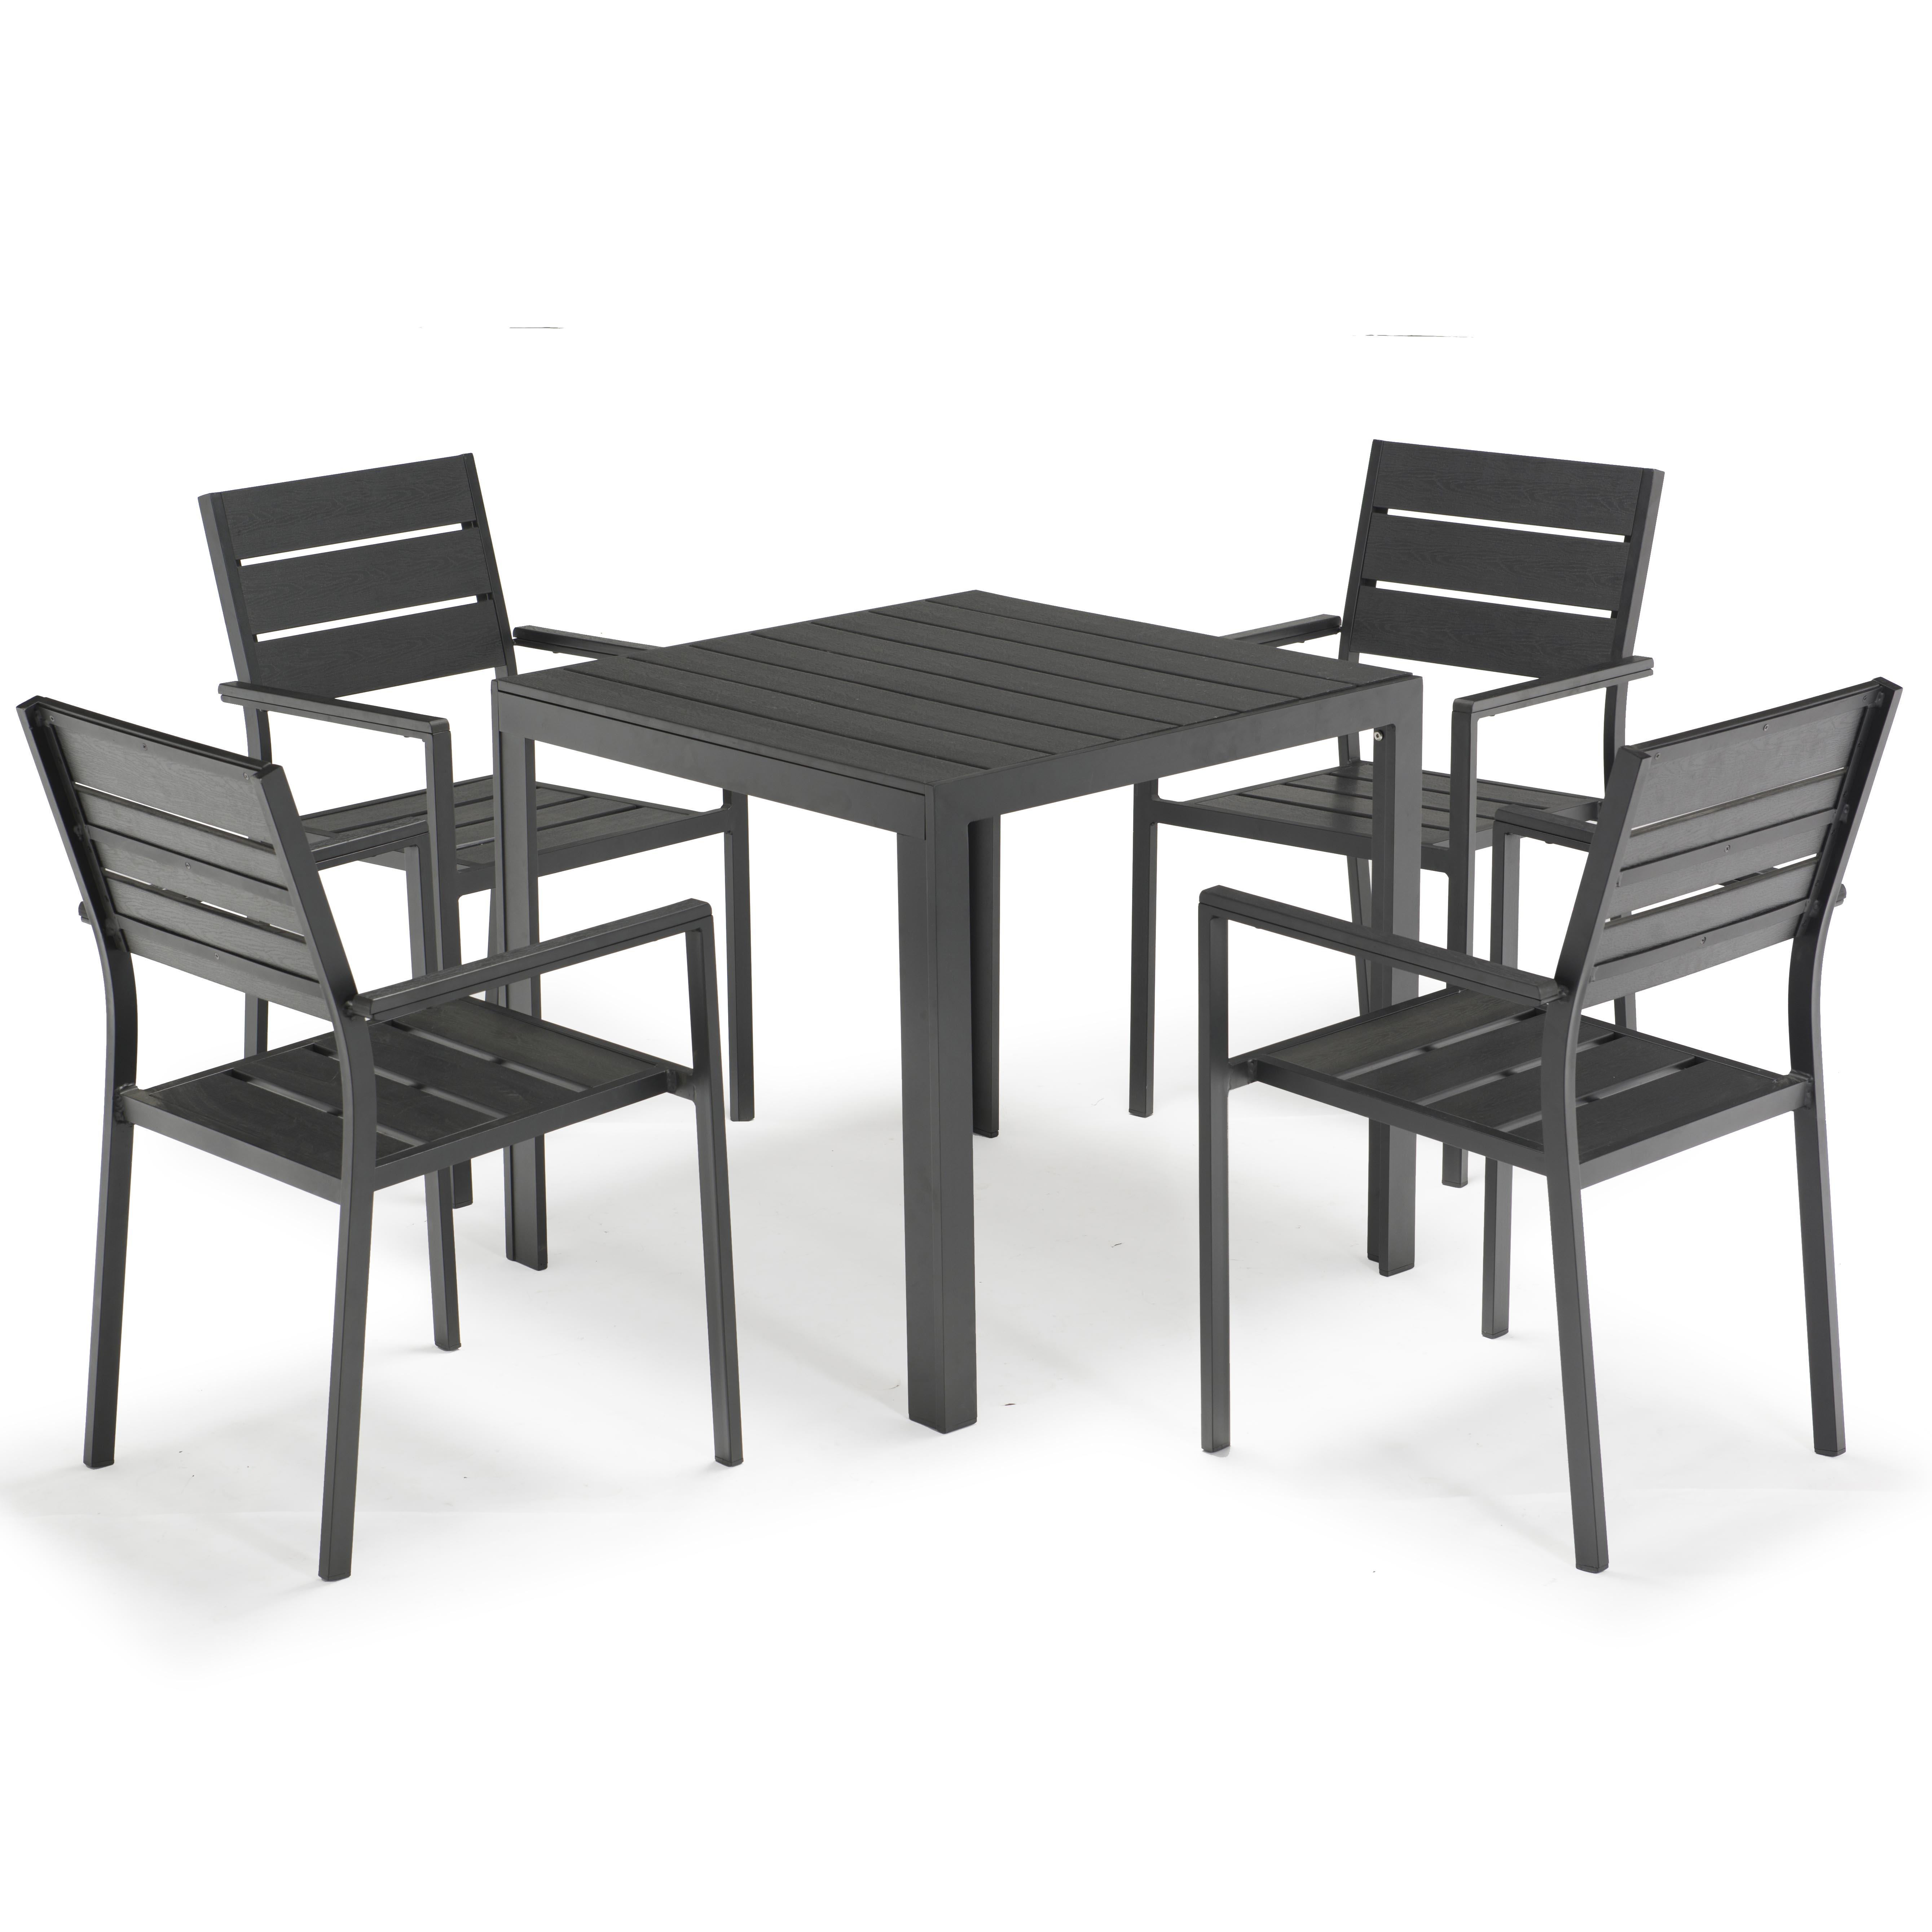 About material advantages of plastic wood furniture